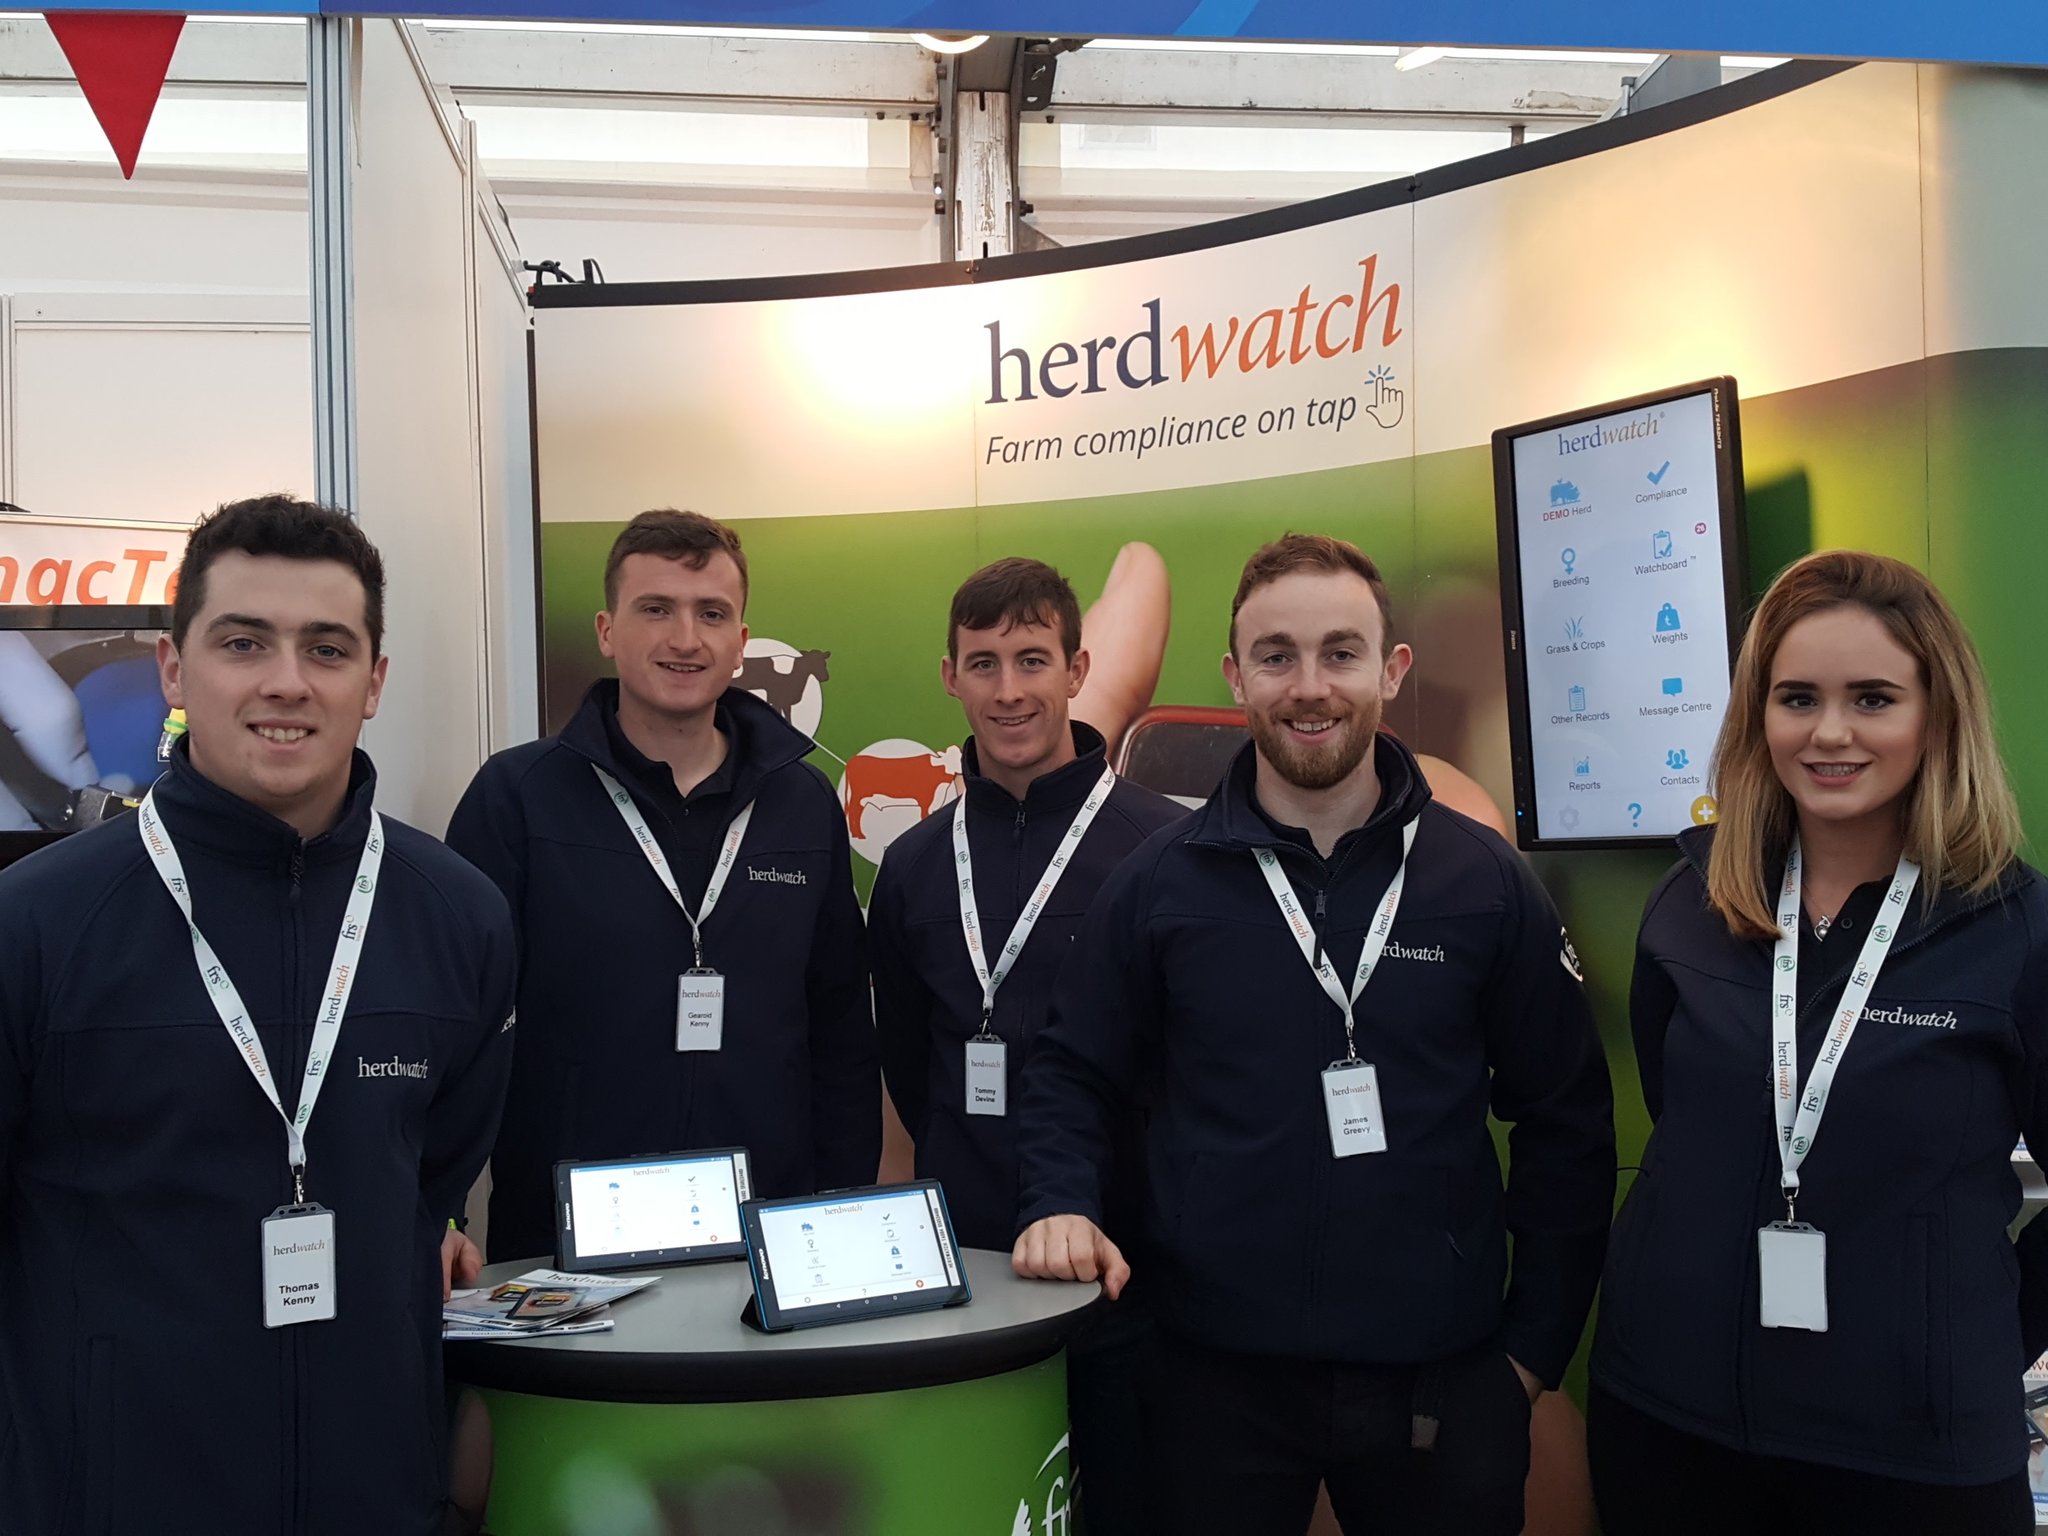 Herdwatch team at event old logo